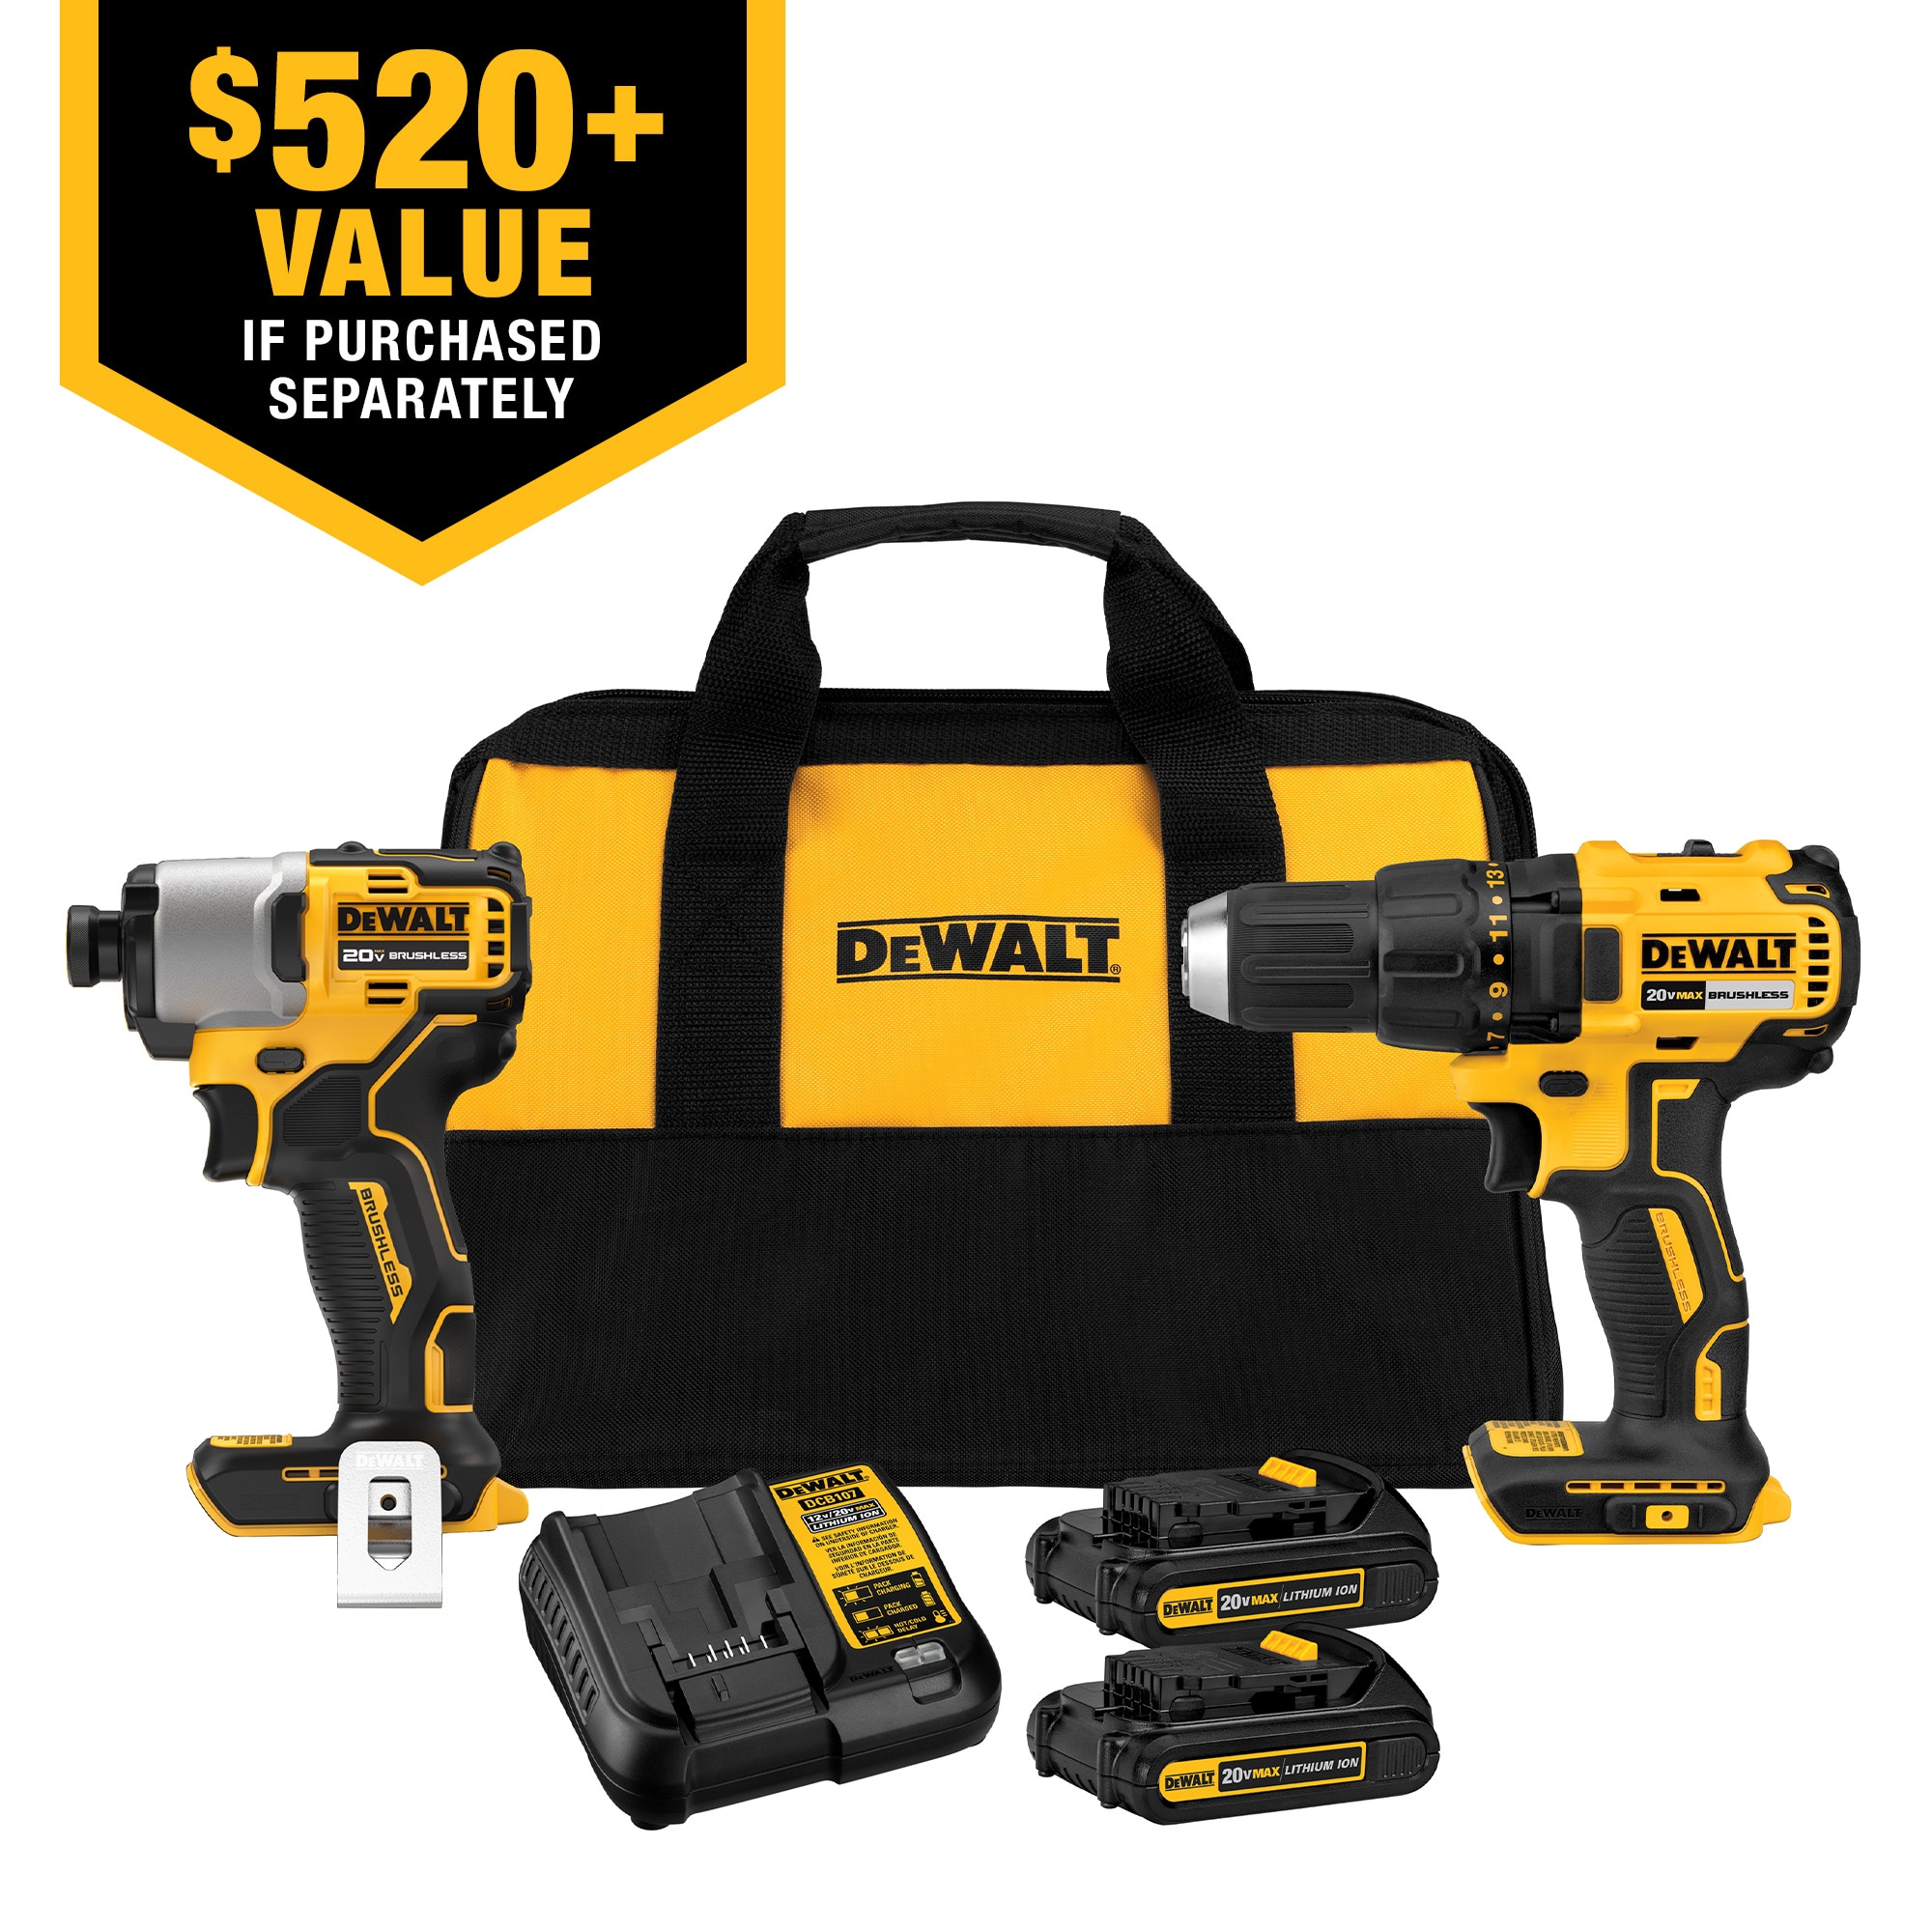 DEWALT 20V MAX Compact Brushless Drill/Driver And Impact Kit with